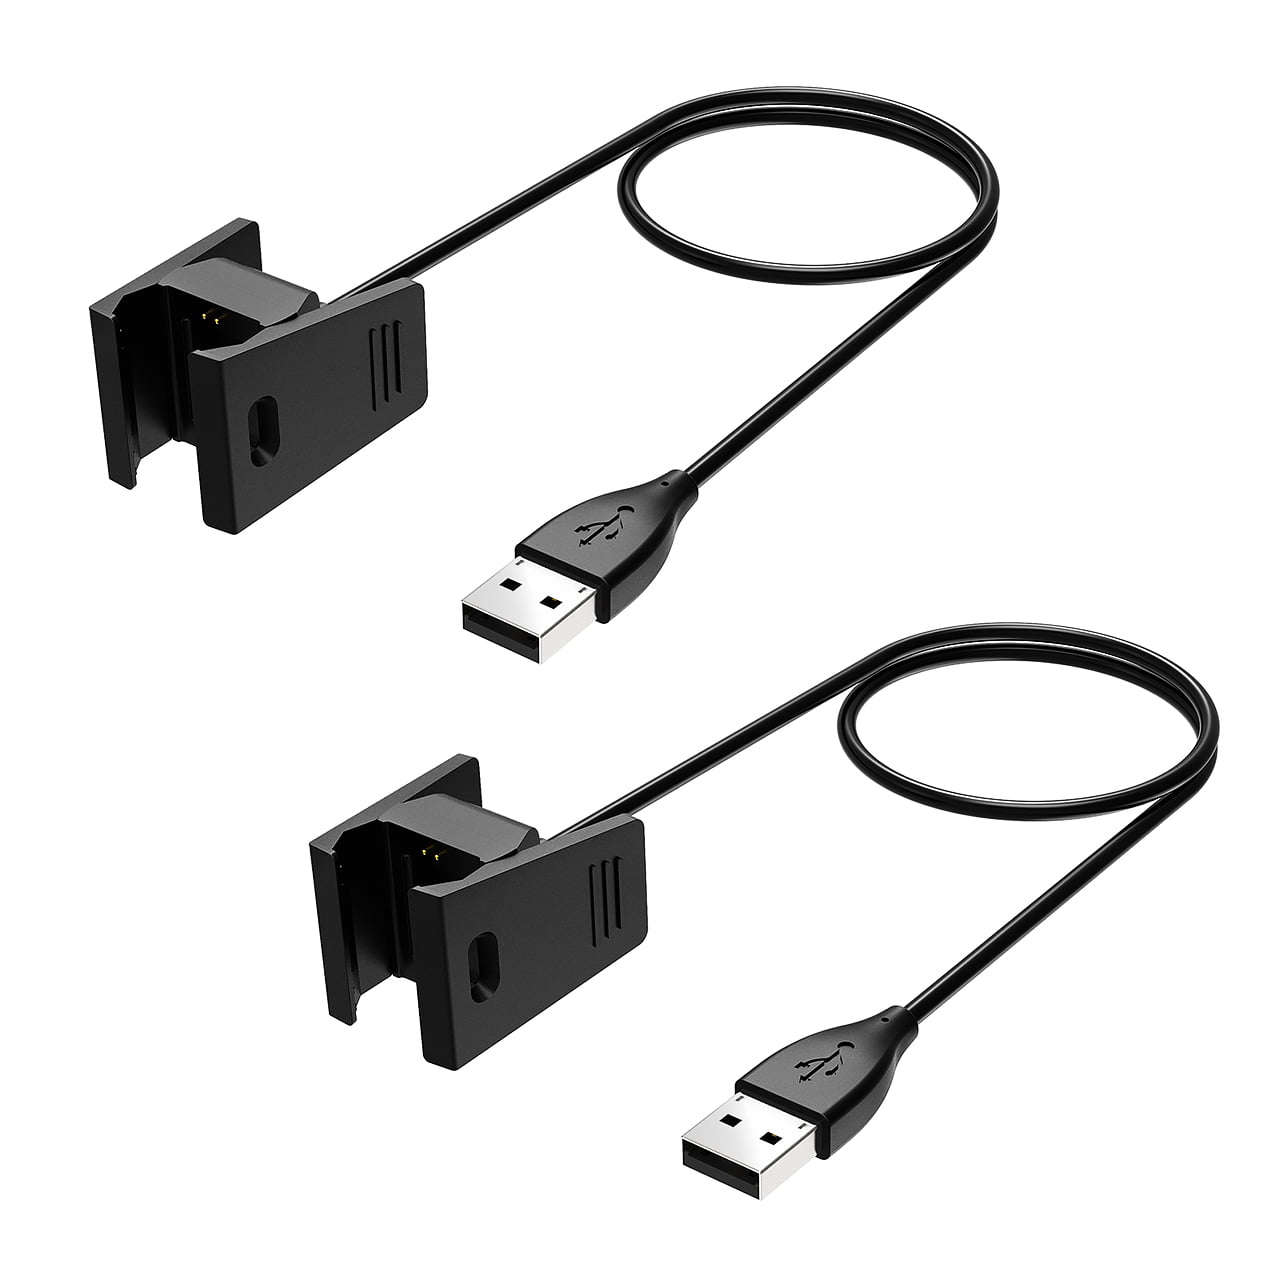 Genuine OEM Fitbit Charge 2 Charger Cable 